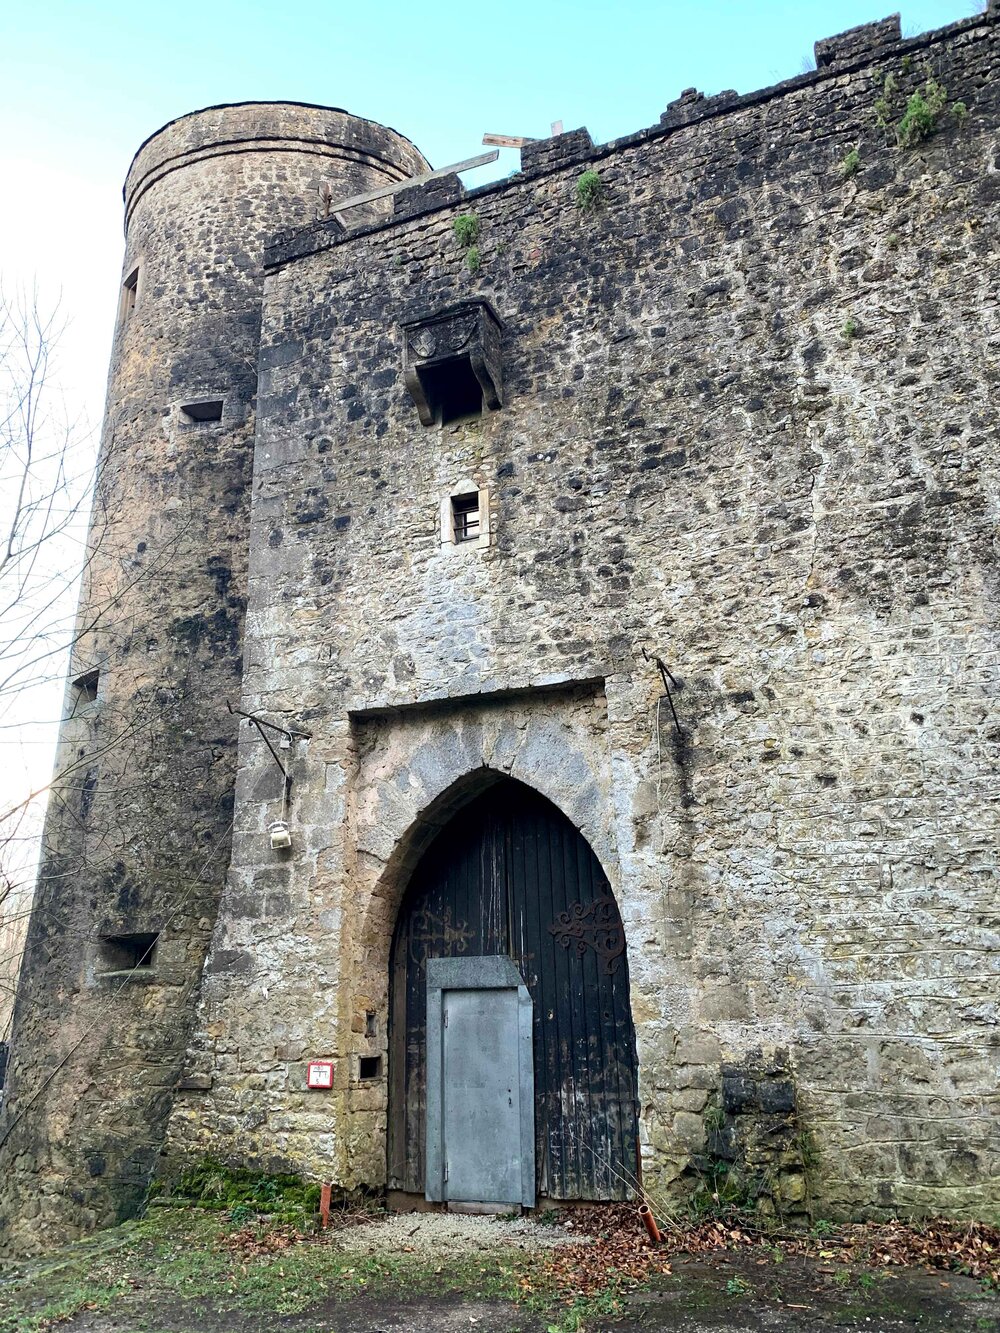 Exterior of Septfontaines Castle in the Valley of the Seven Castles in Luxembourg.jpg